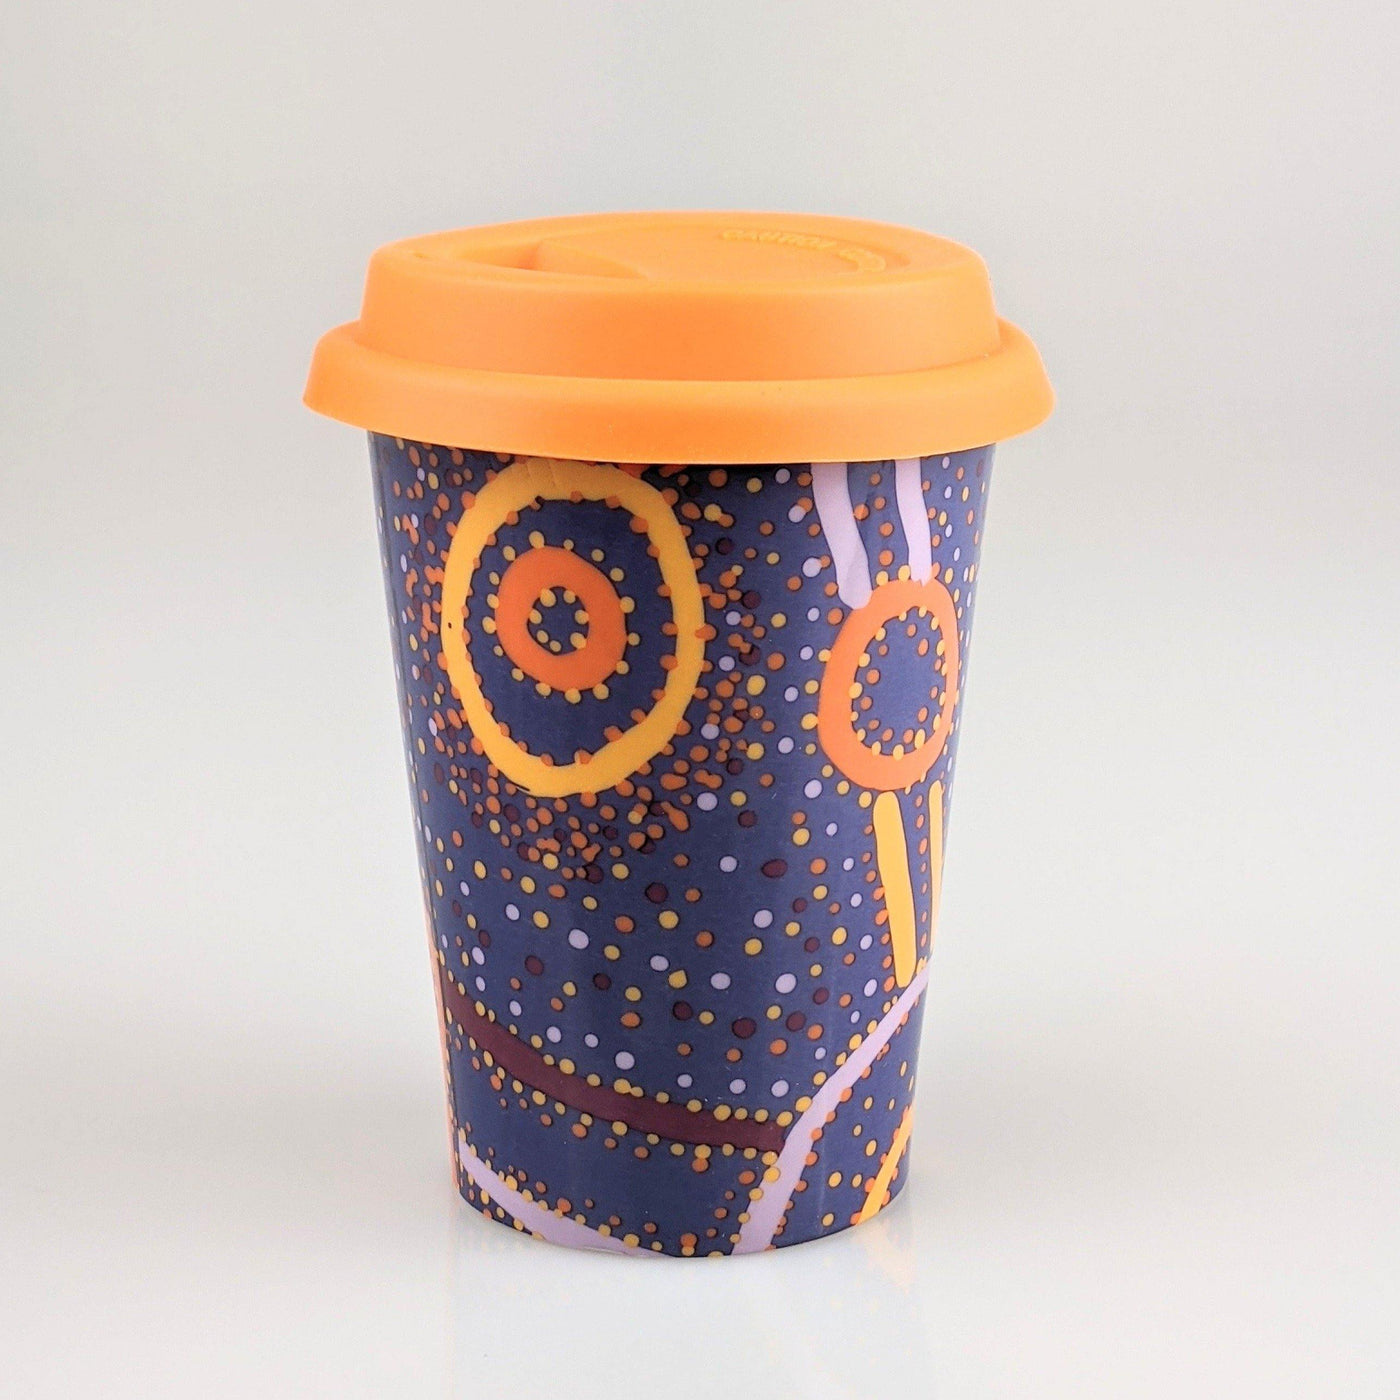 Coffee cup with orange and navy indigenous design printed on it.